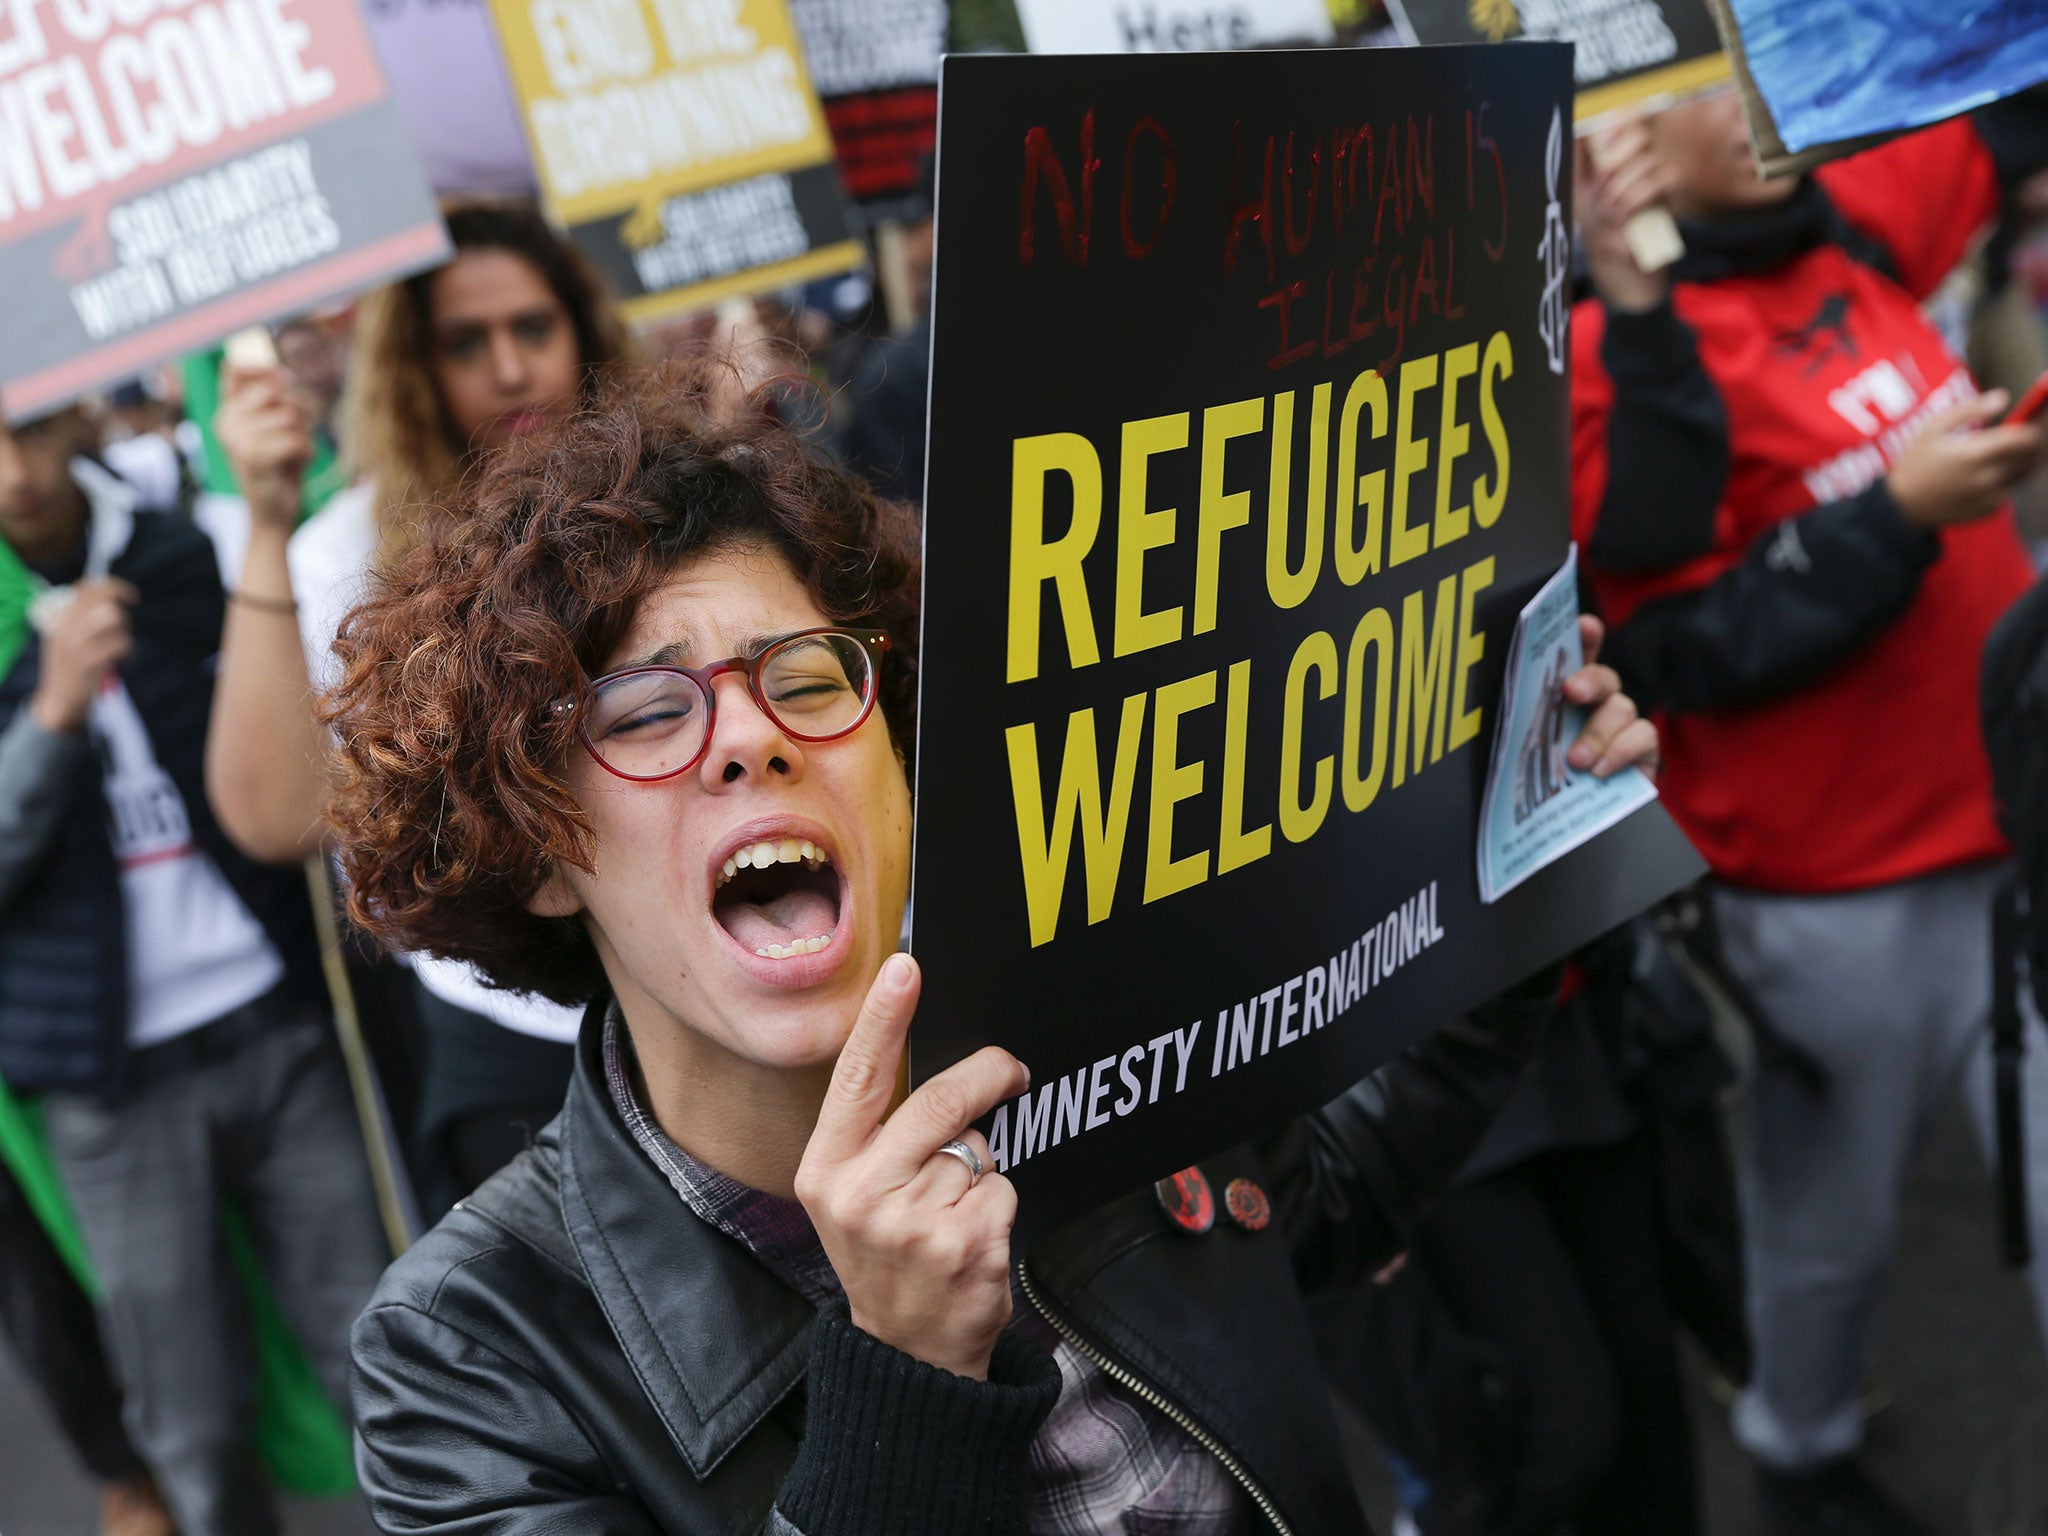 A march calling for the British Government to resettle more refugees in central London on September 17, 2016.